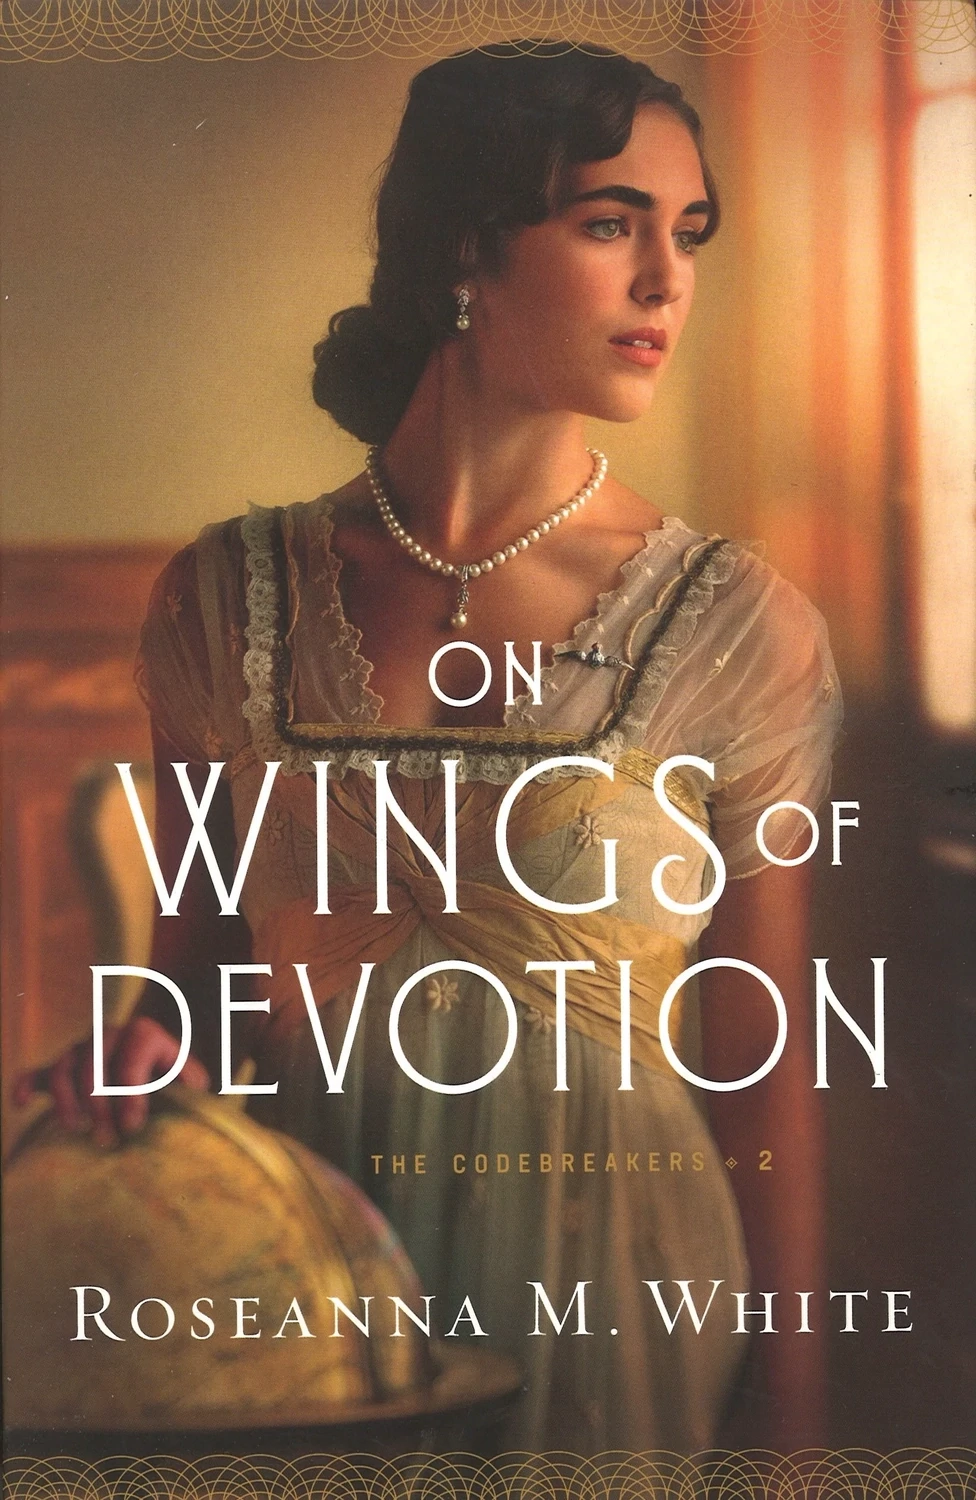 On Wings of Devotion (The Codebreakers, Book 2) by Roseanna M. White